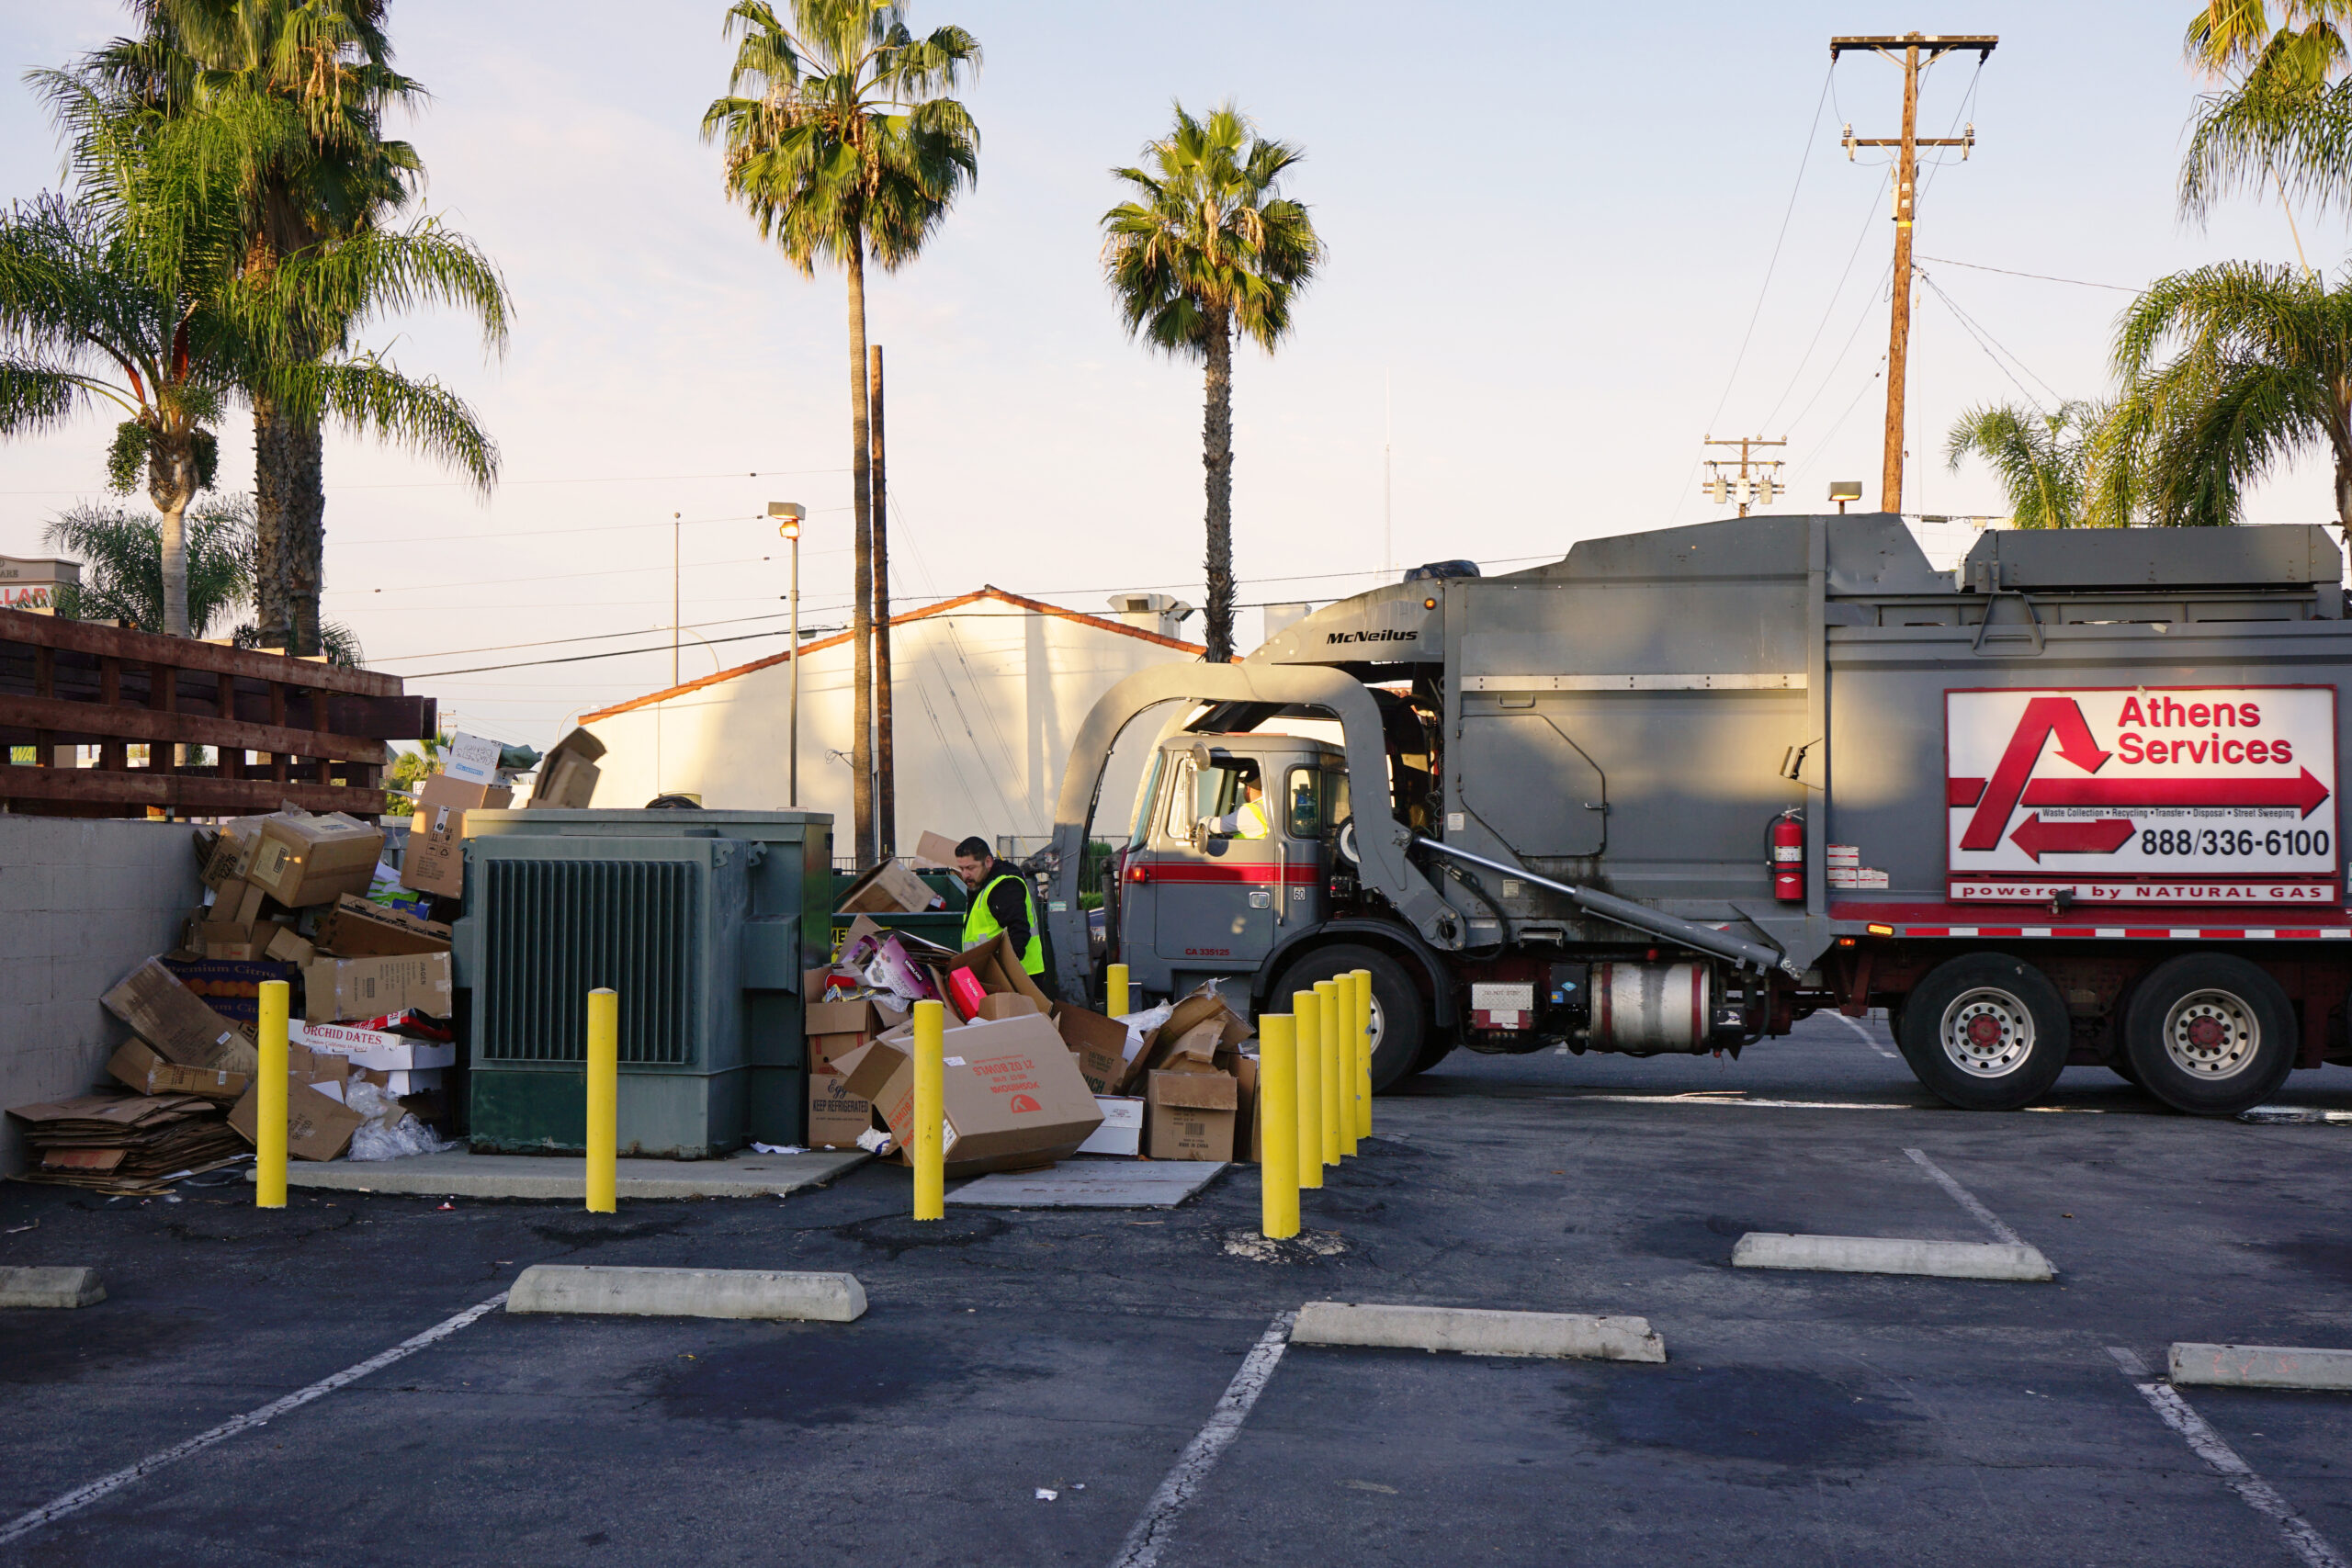 11-30-19 Maywood Clean Up truck drivers boxes shopping center